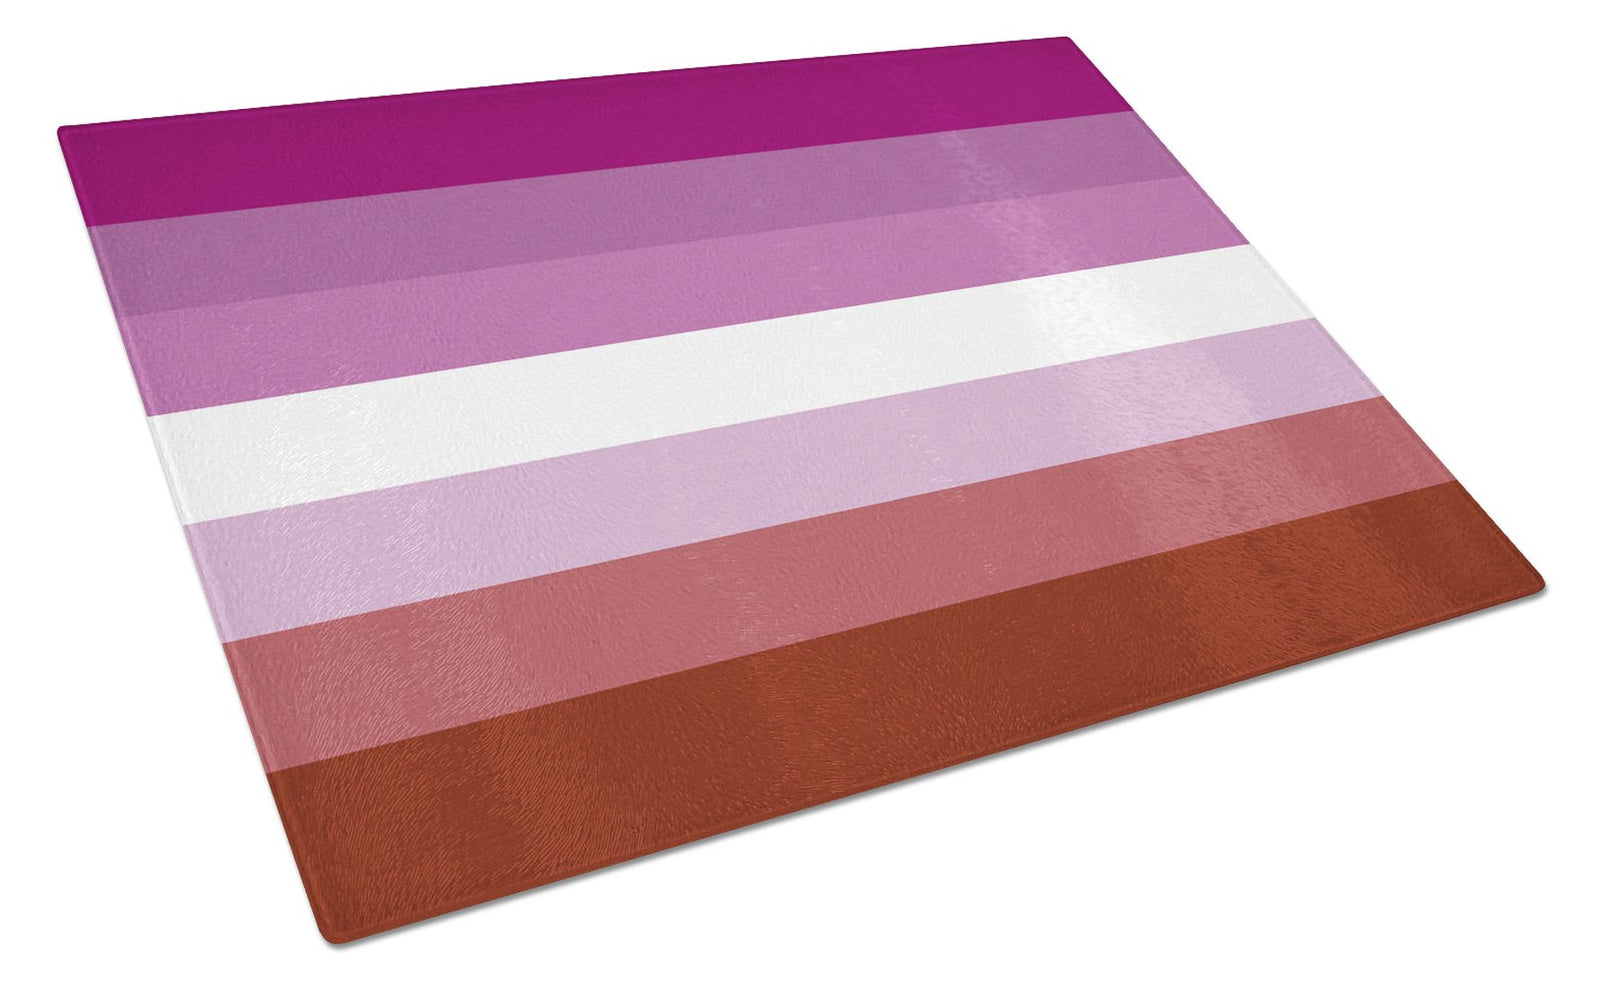 Buy this Lesbian Pride Glass Cutting Board Large